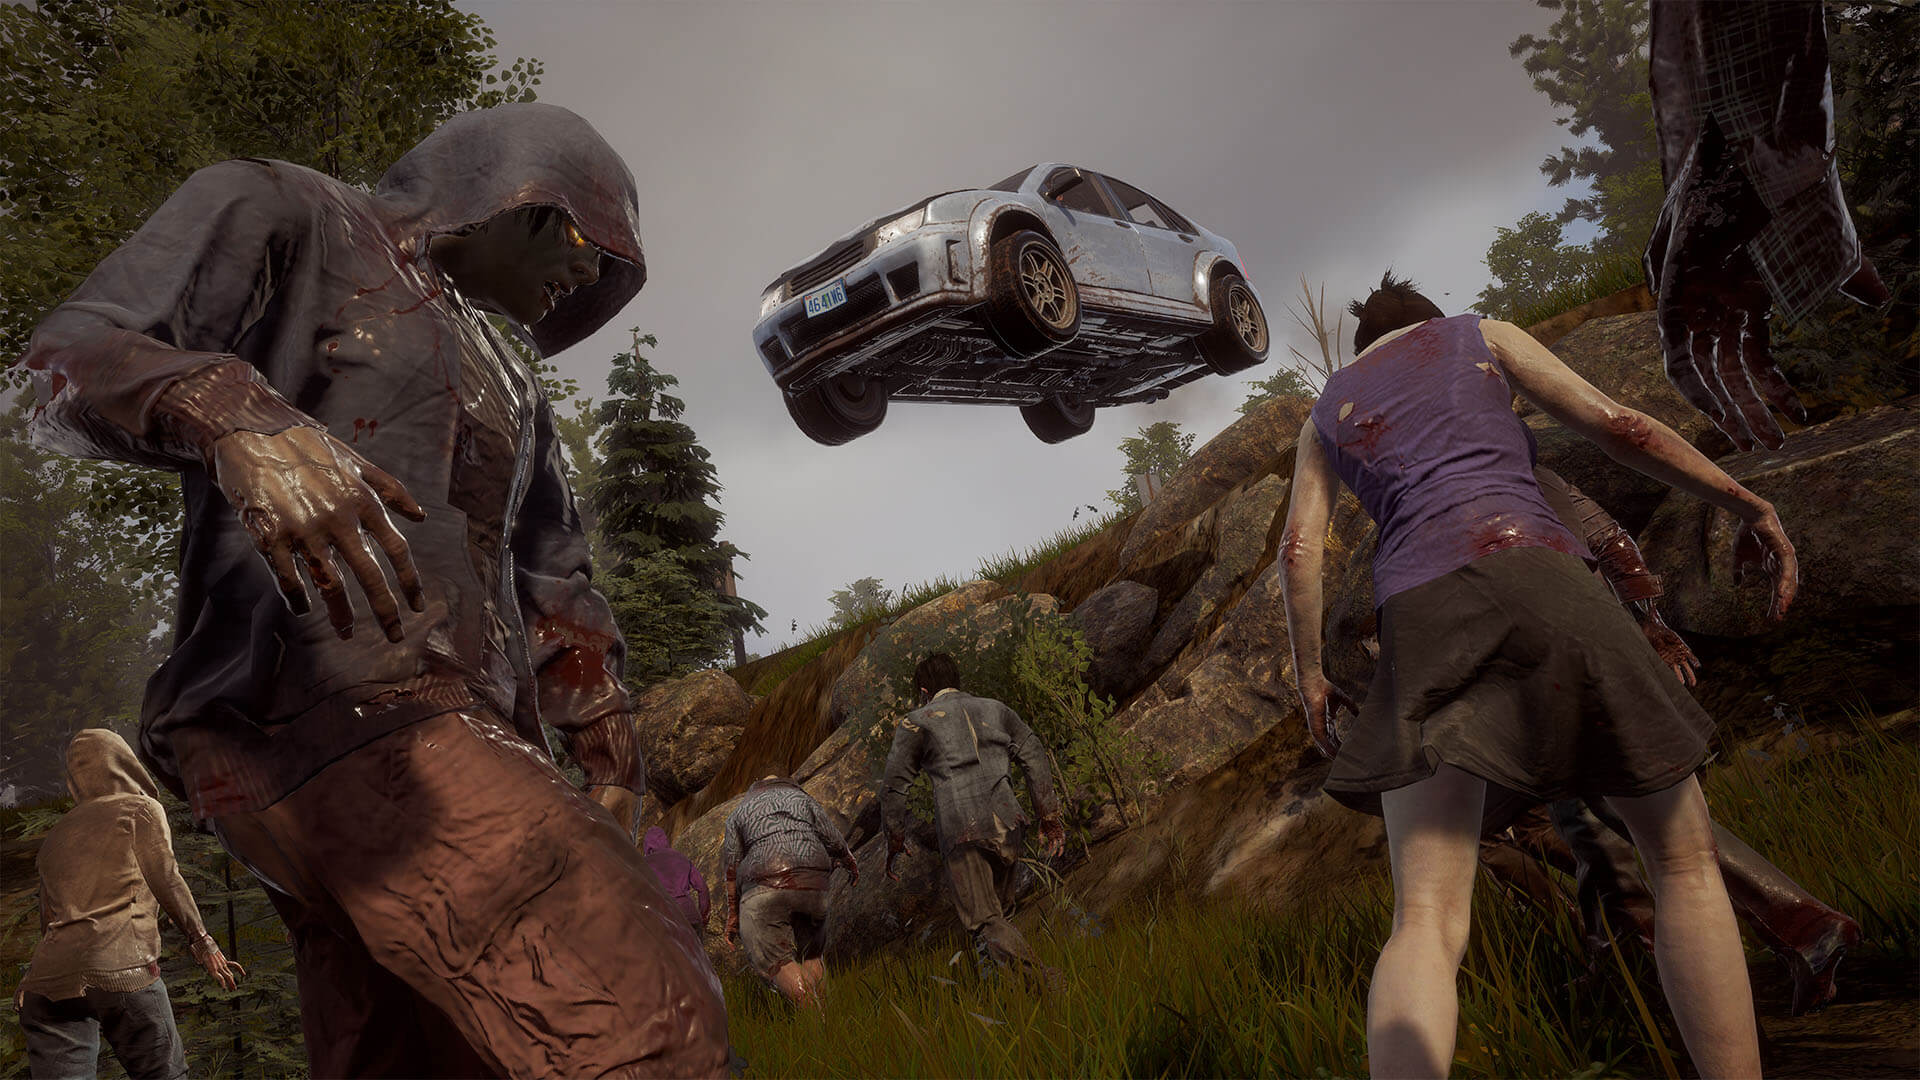 State of Decay 3 gameplay: Customization on weapons & vehicles